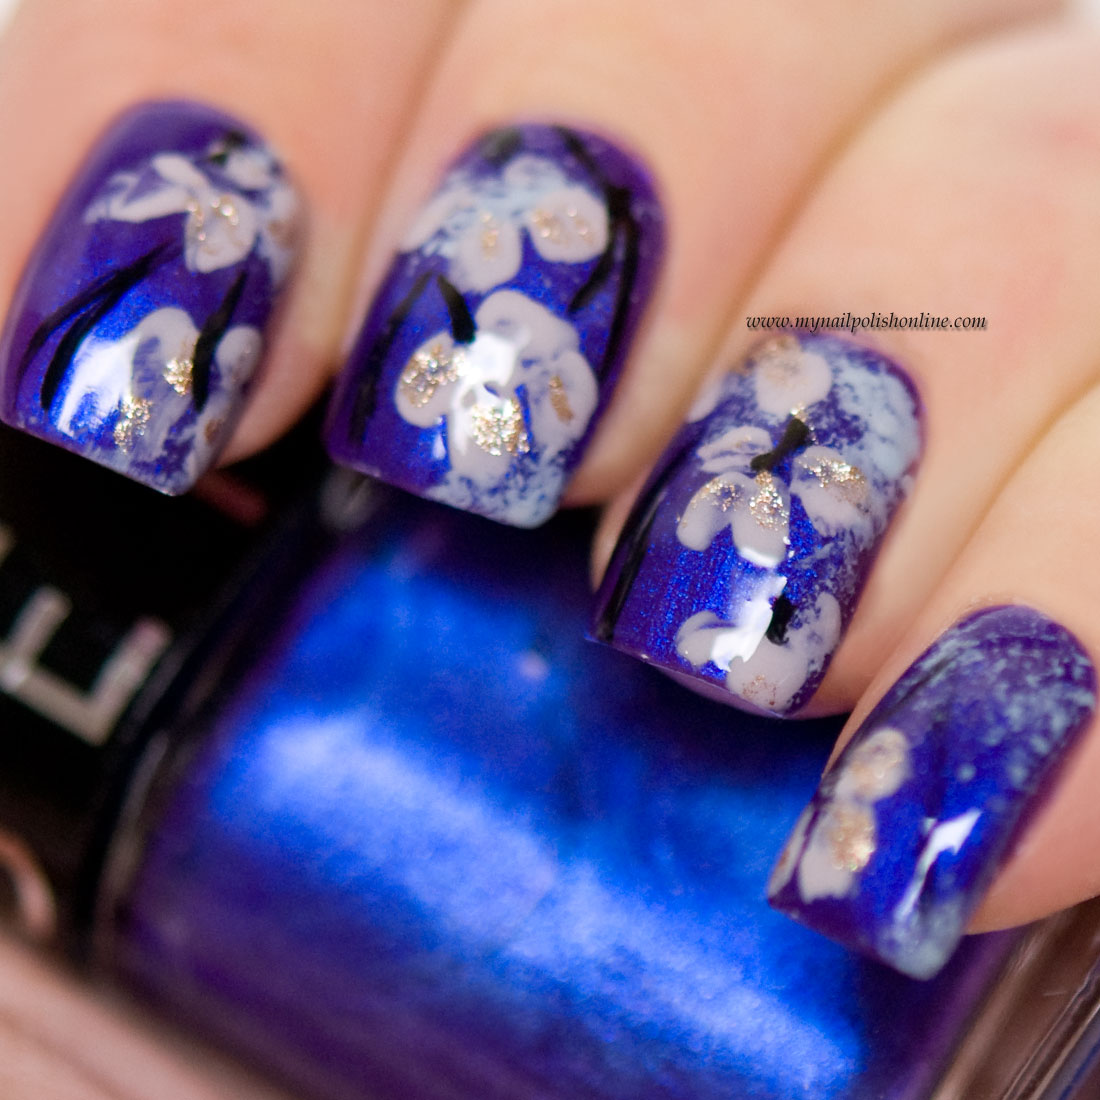 31DC2015 - Day14 Flowers - My Nail Polish Online